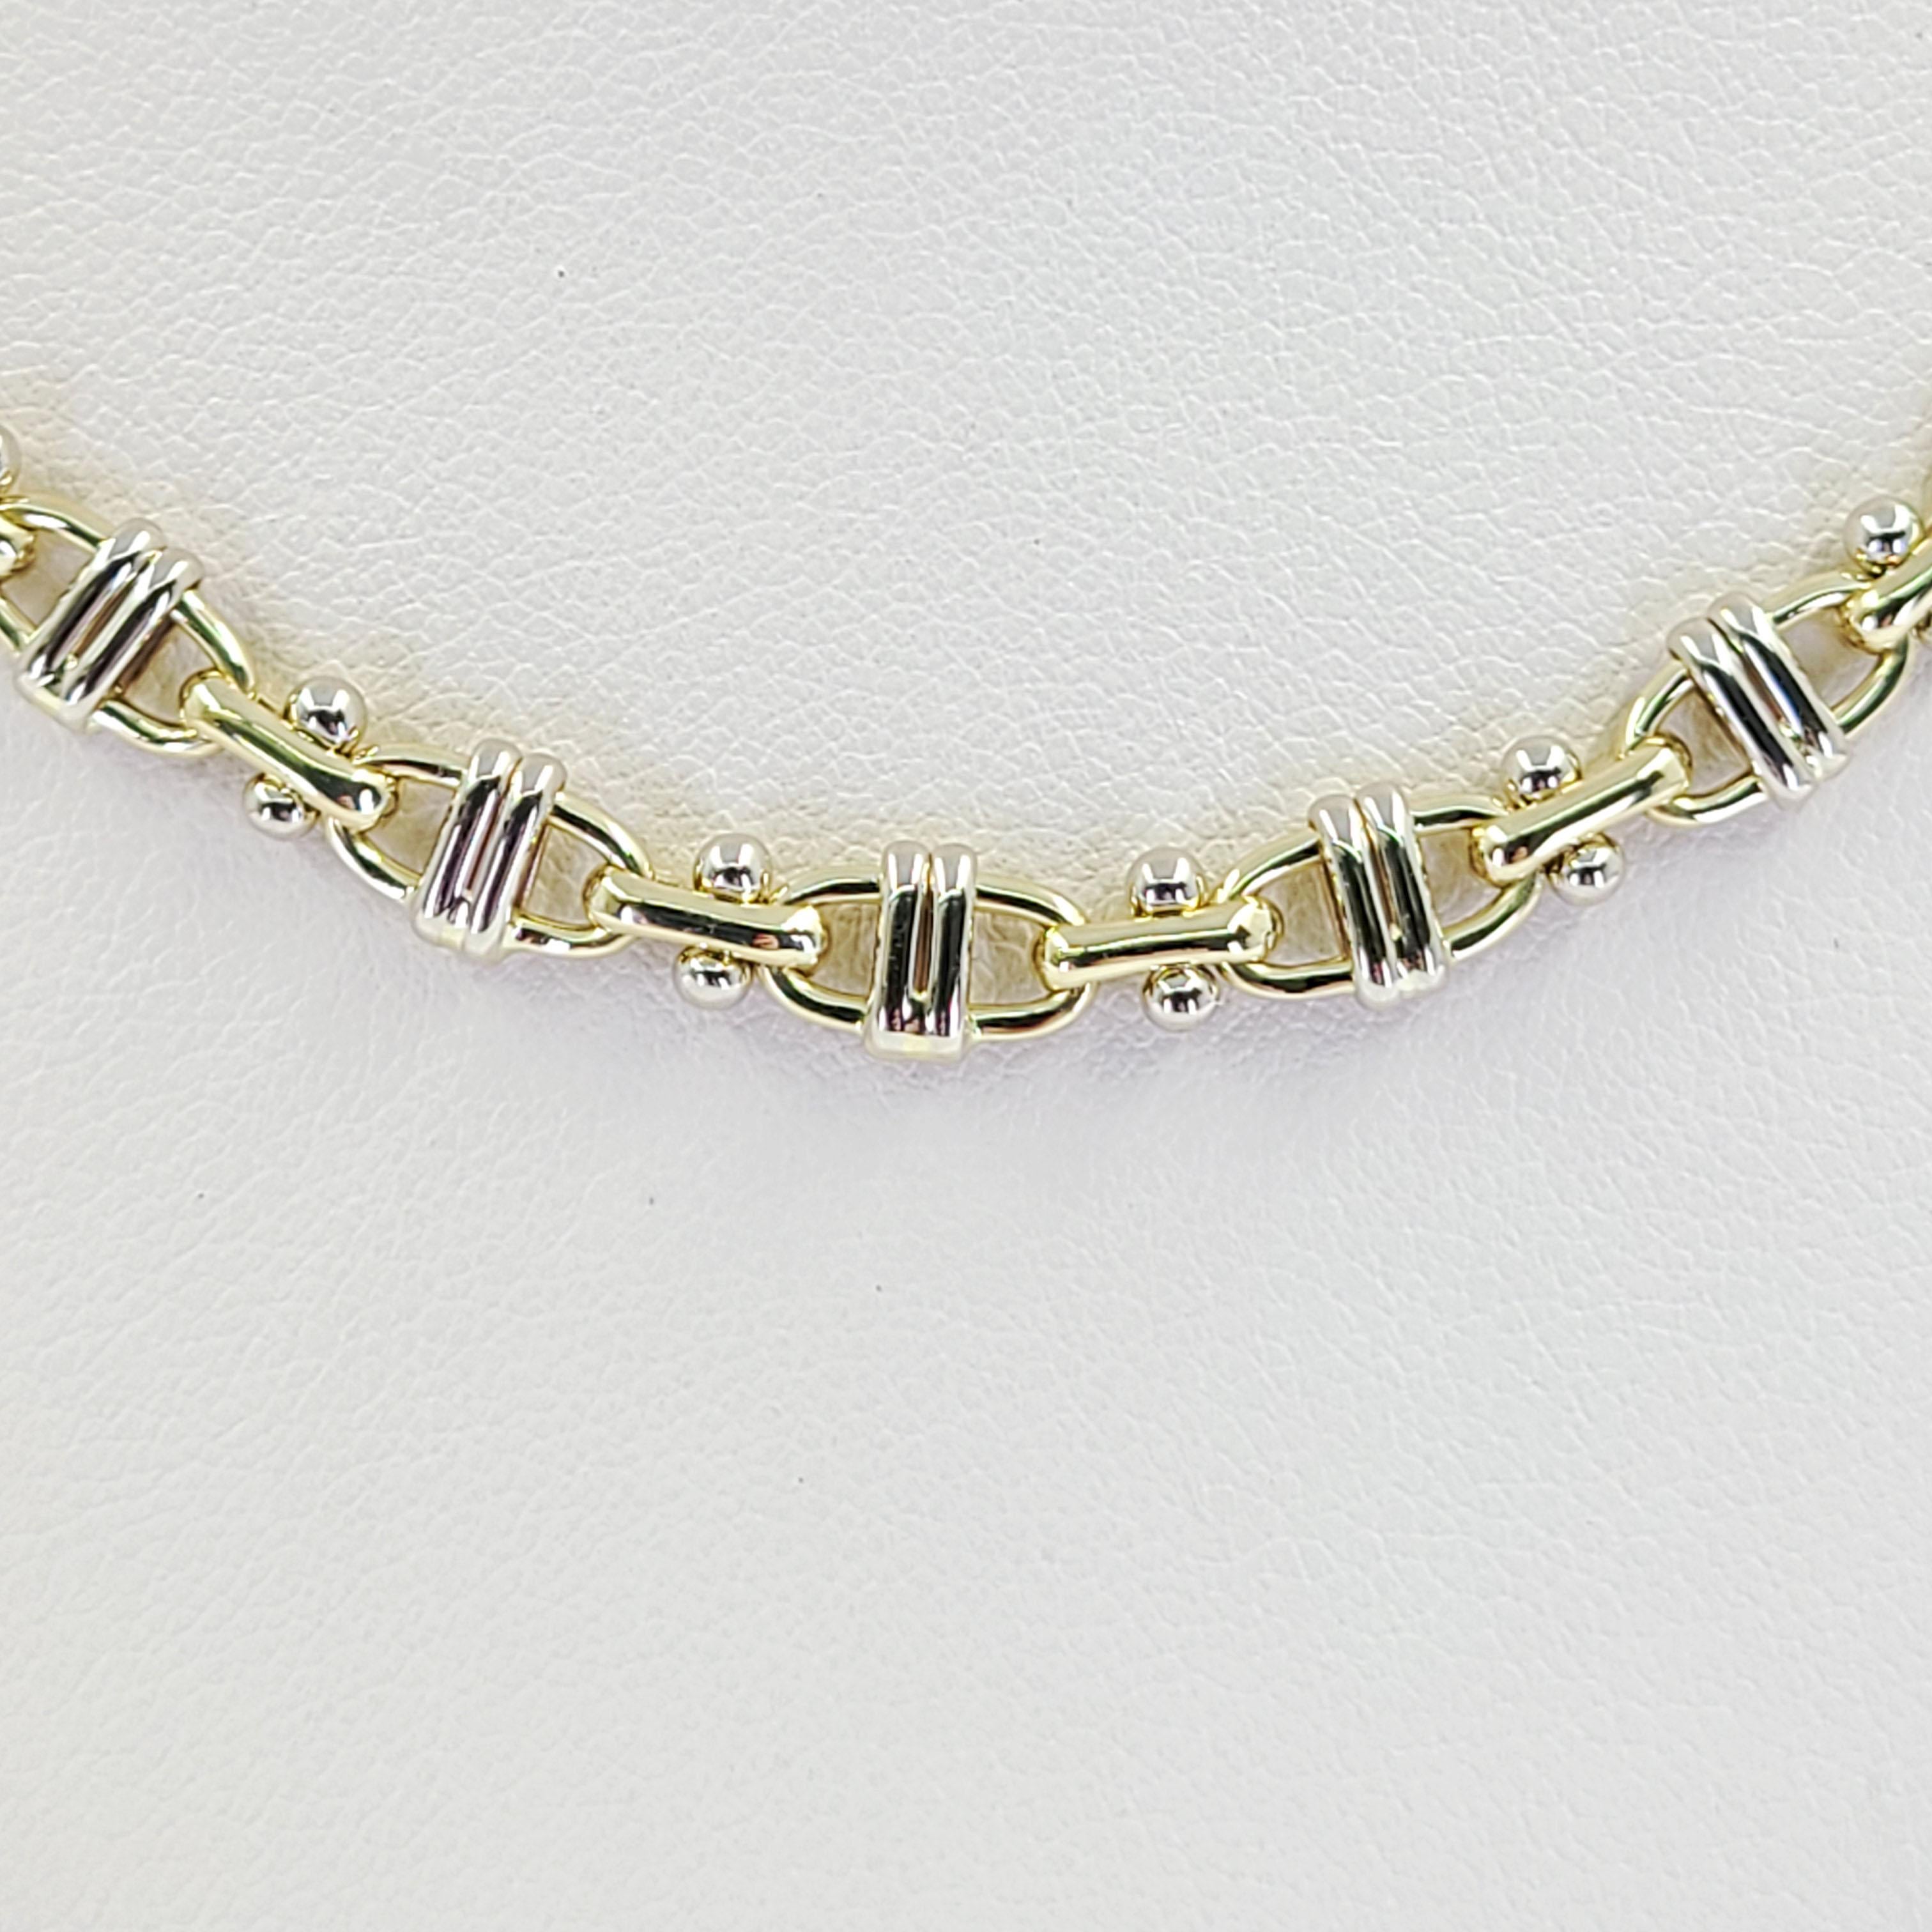 18 Karat White and Yellow Gold Anchor Link Chain Measuring 24 Inches Long With Large Lobster Clasp. Finished Weight Is 39.0 Grams.